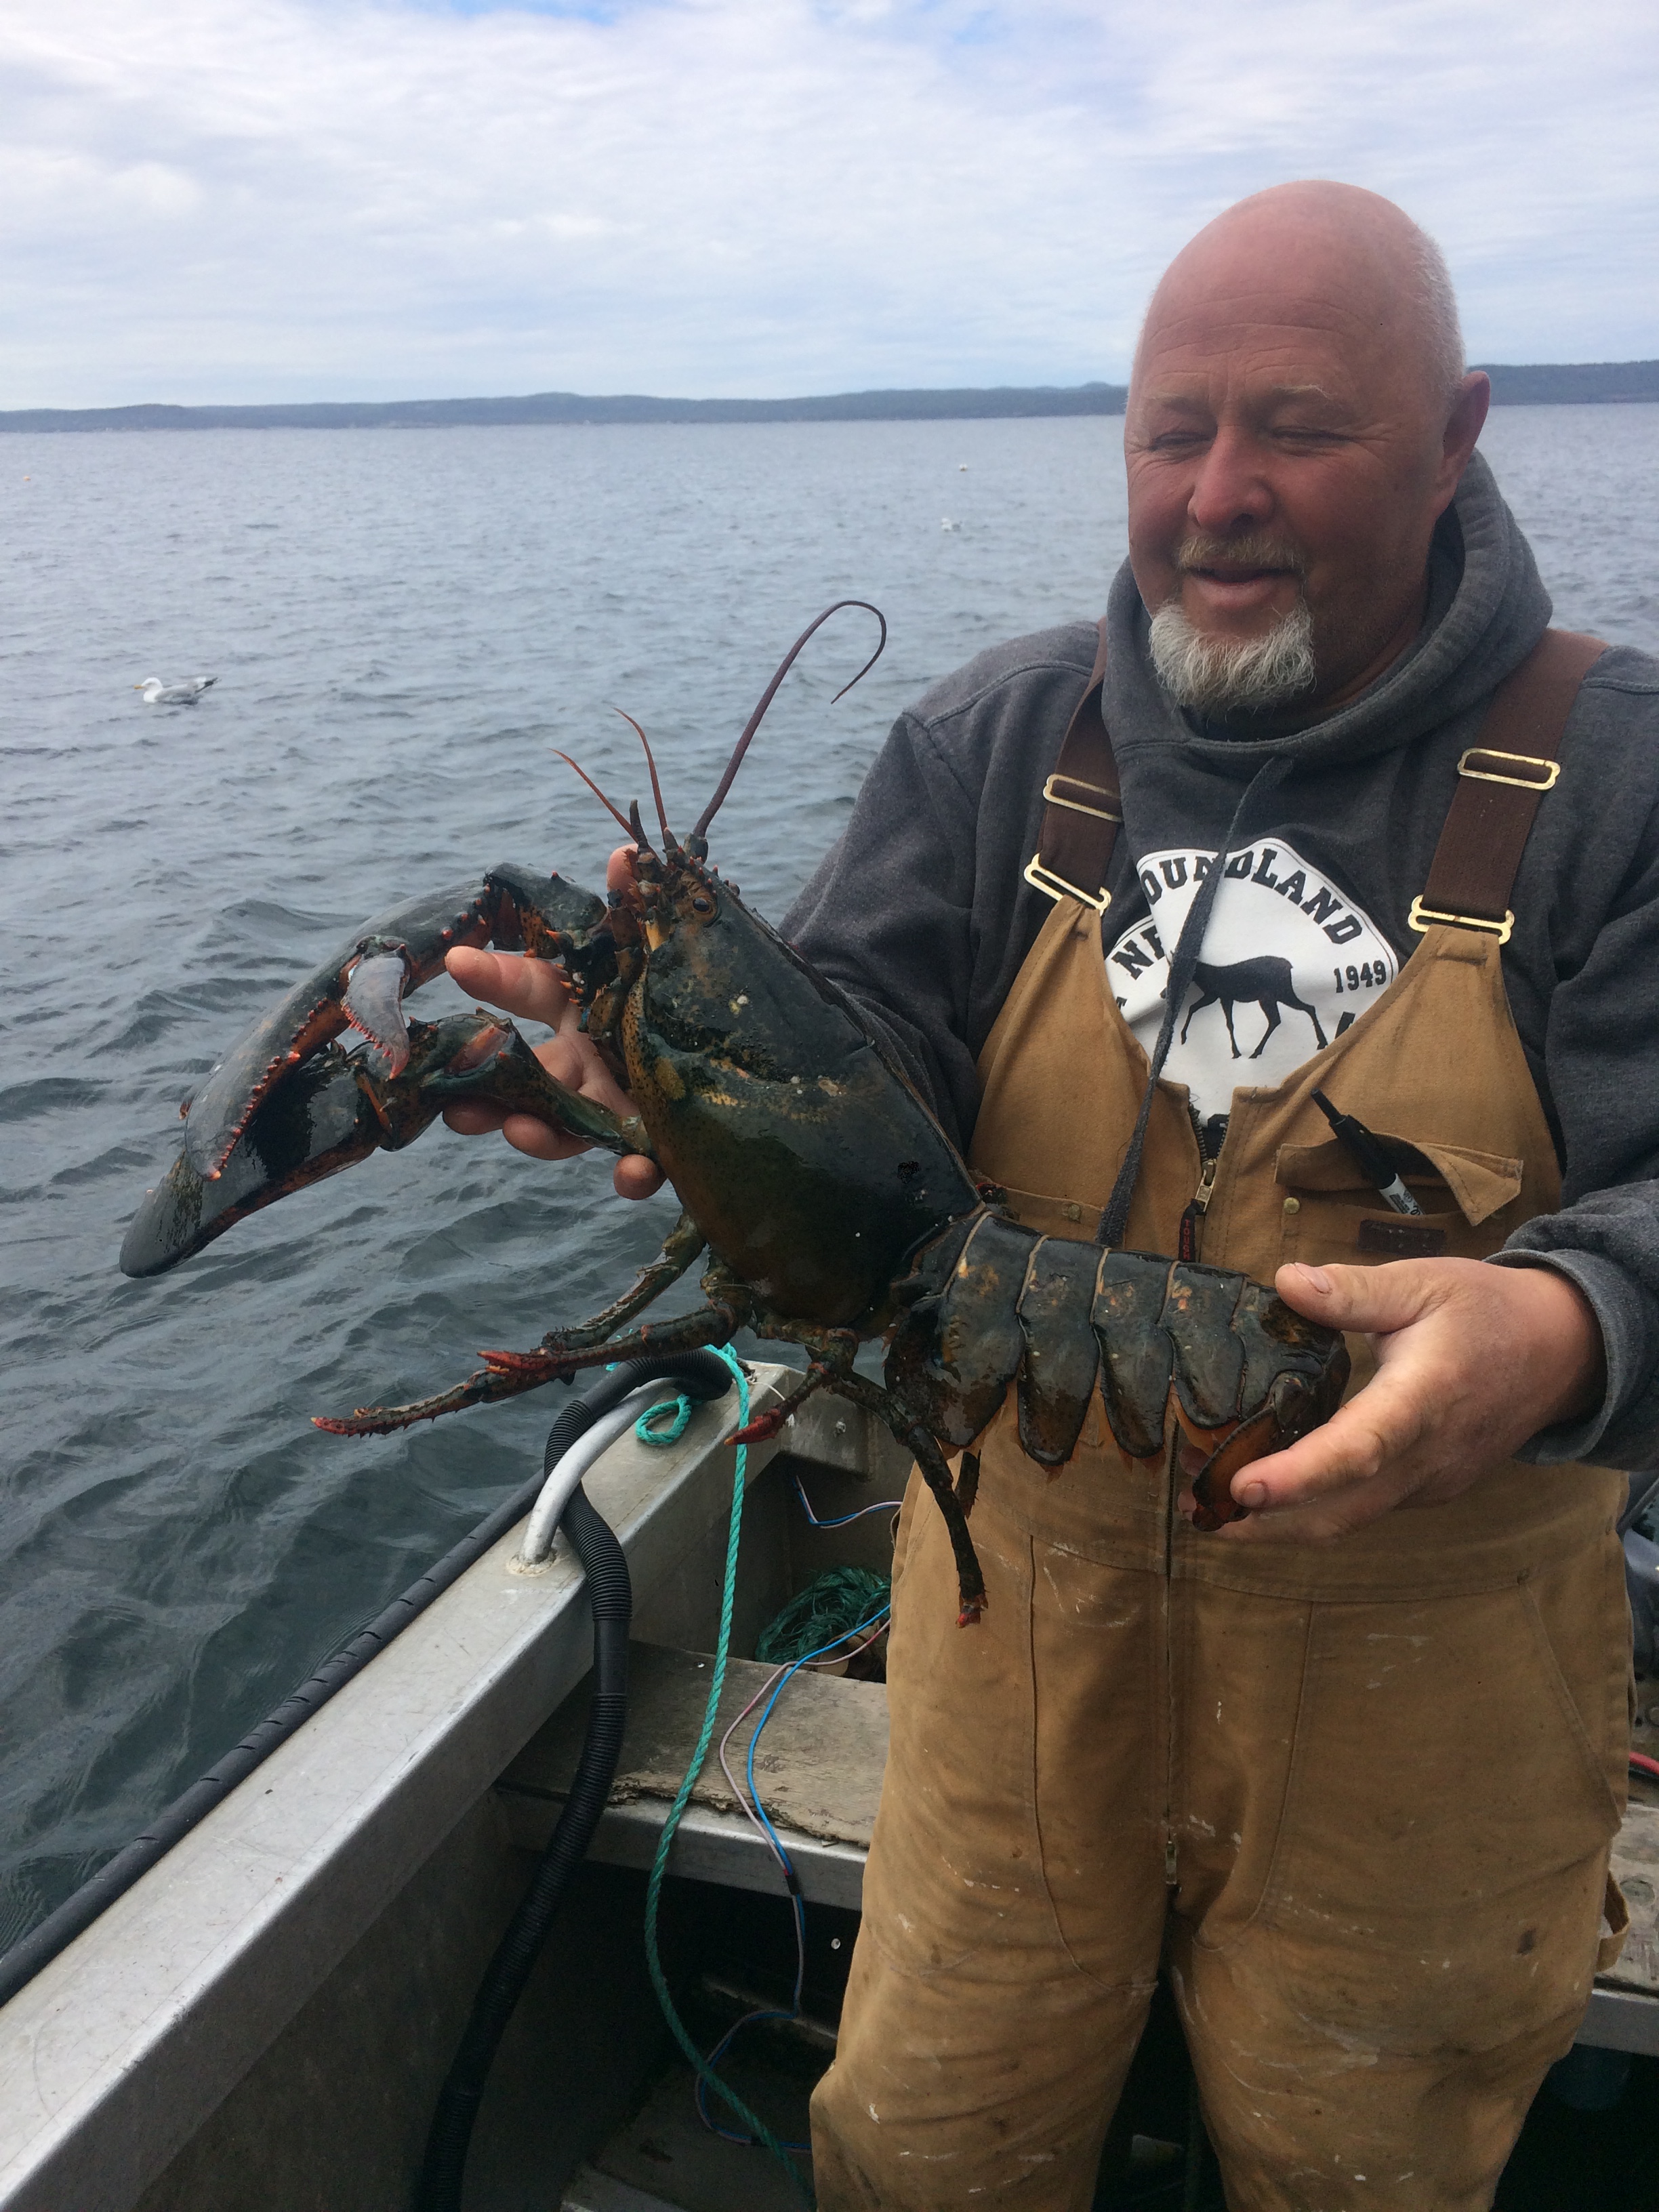 Jerry holding a lobster on his boat